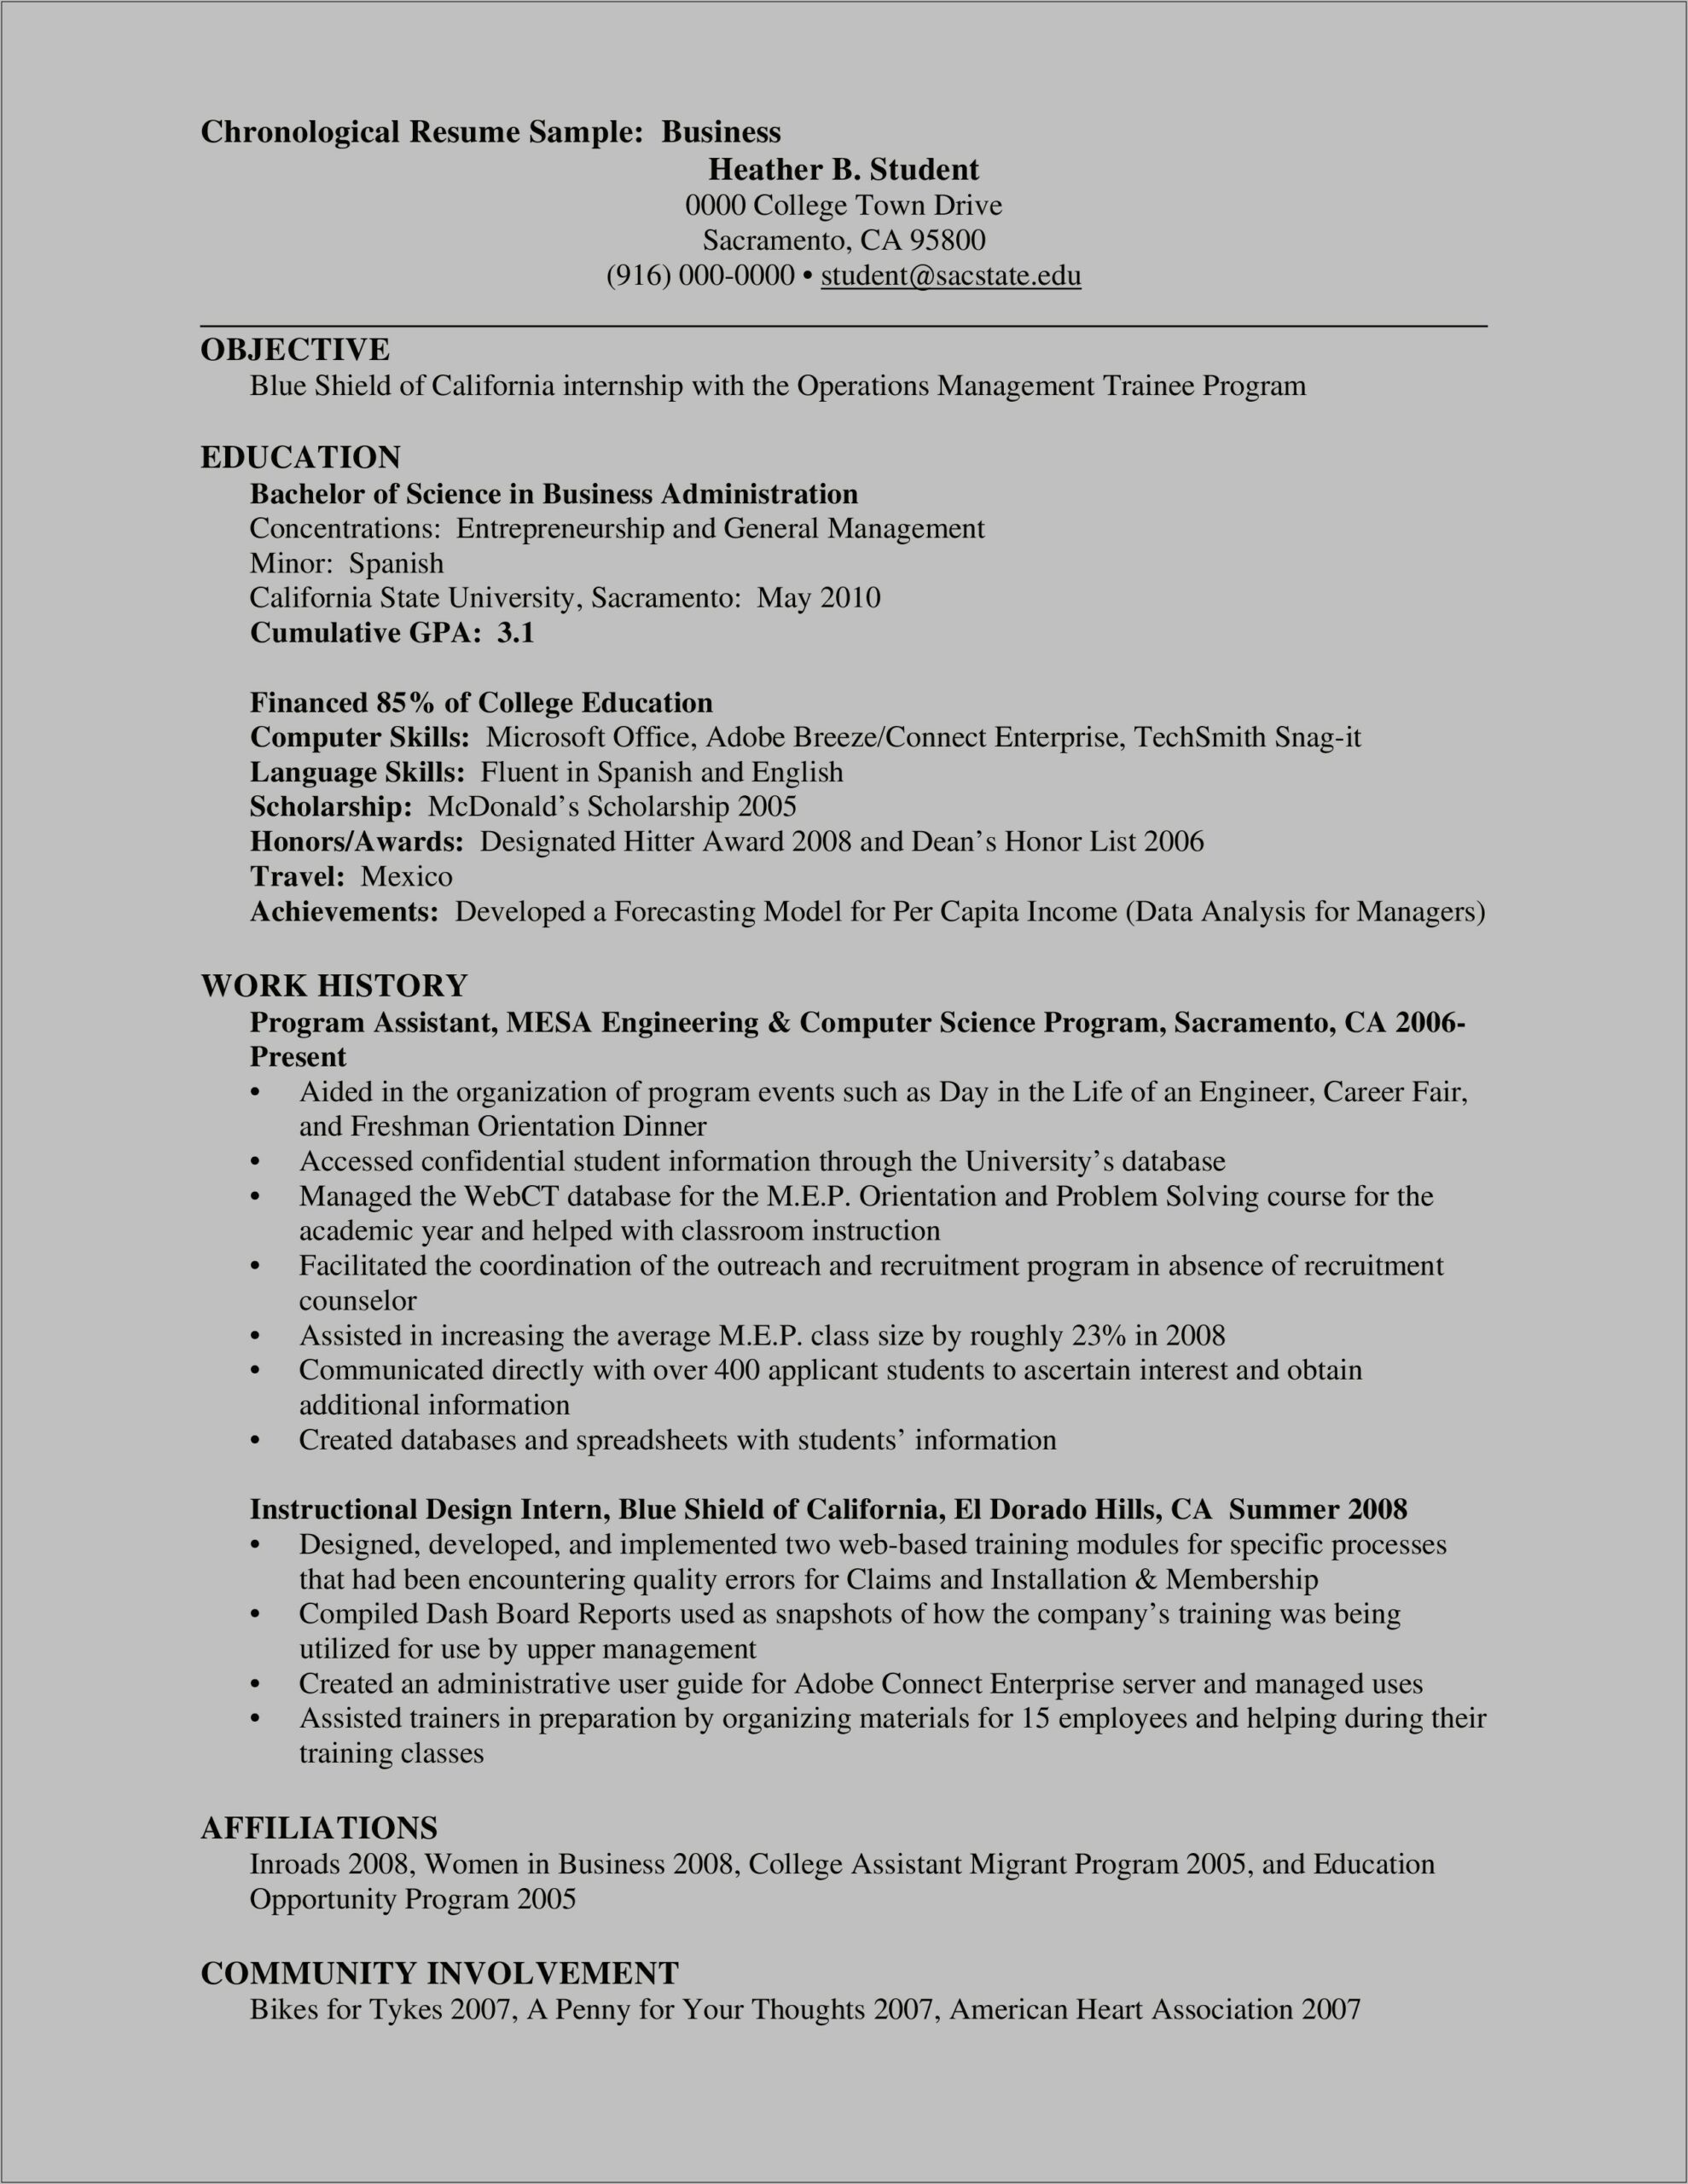 Sample Mcdonald's Assistant Manager Resume